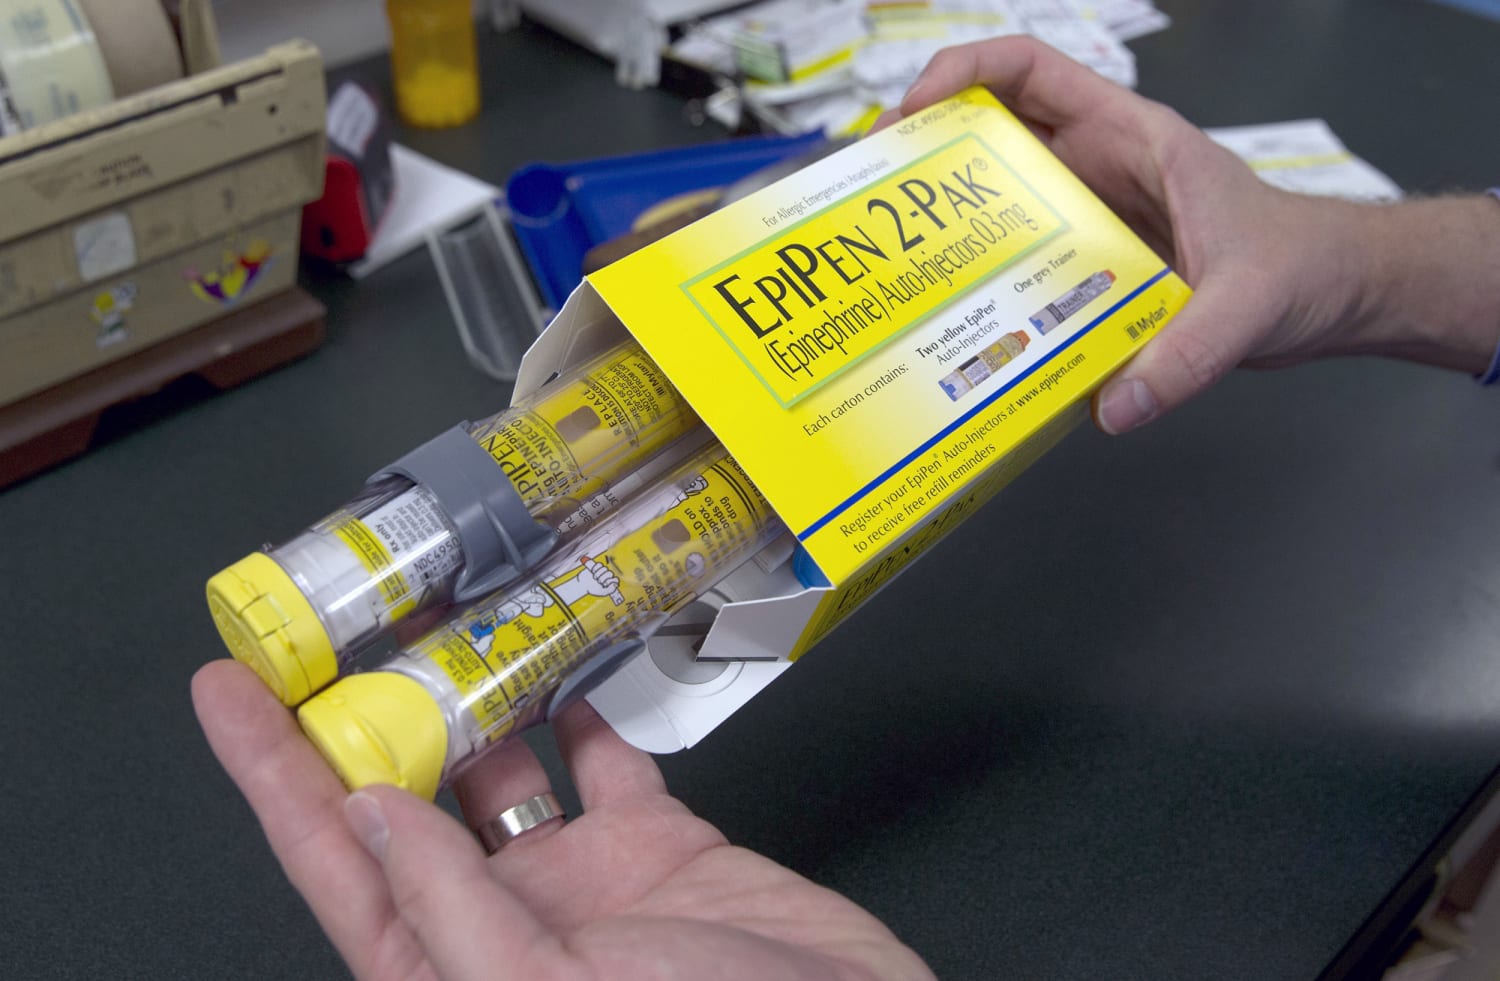 FDA extends EpiPen expiration dates to cover shortages